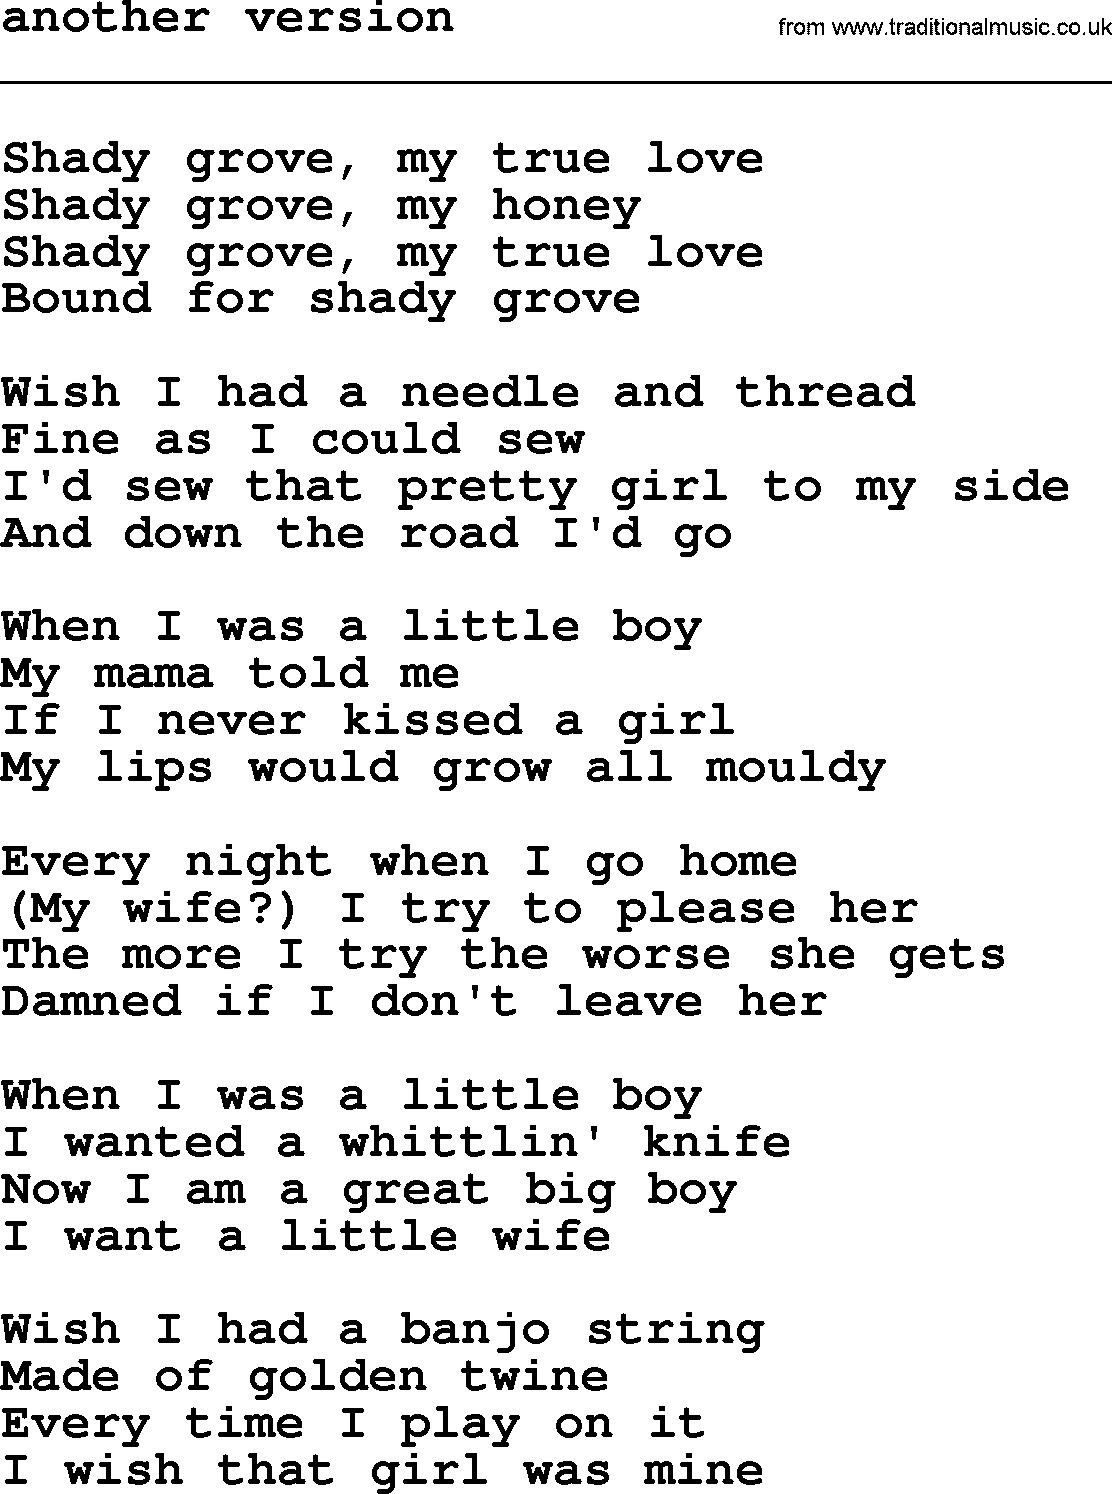 The Byrds song Another Version, lyrics